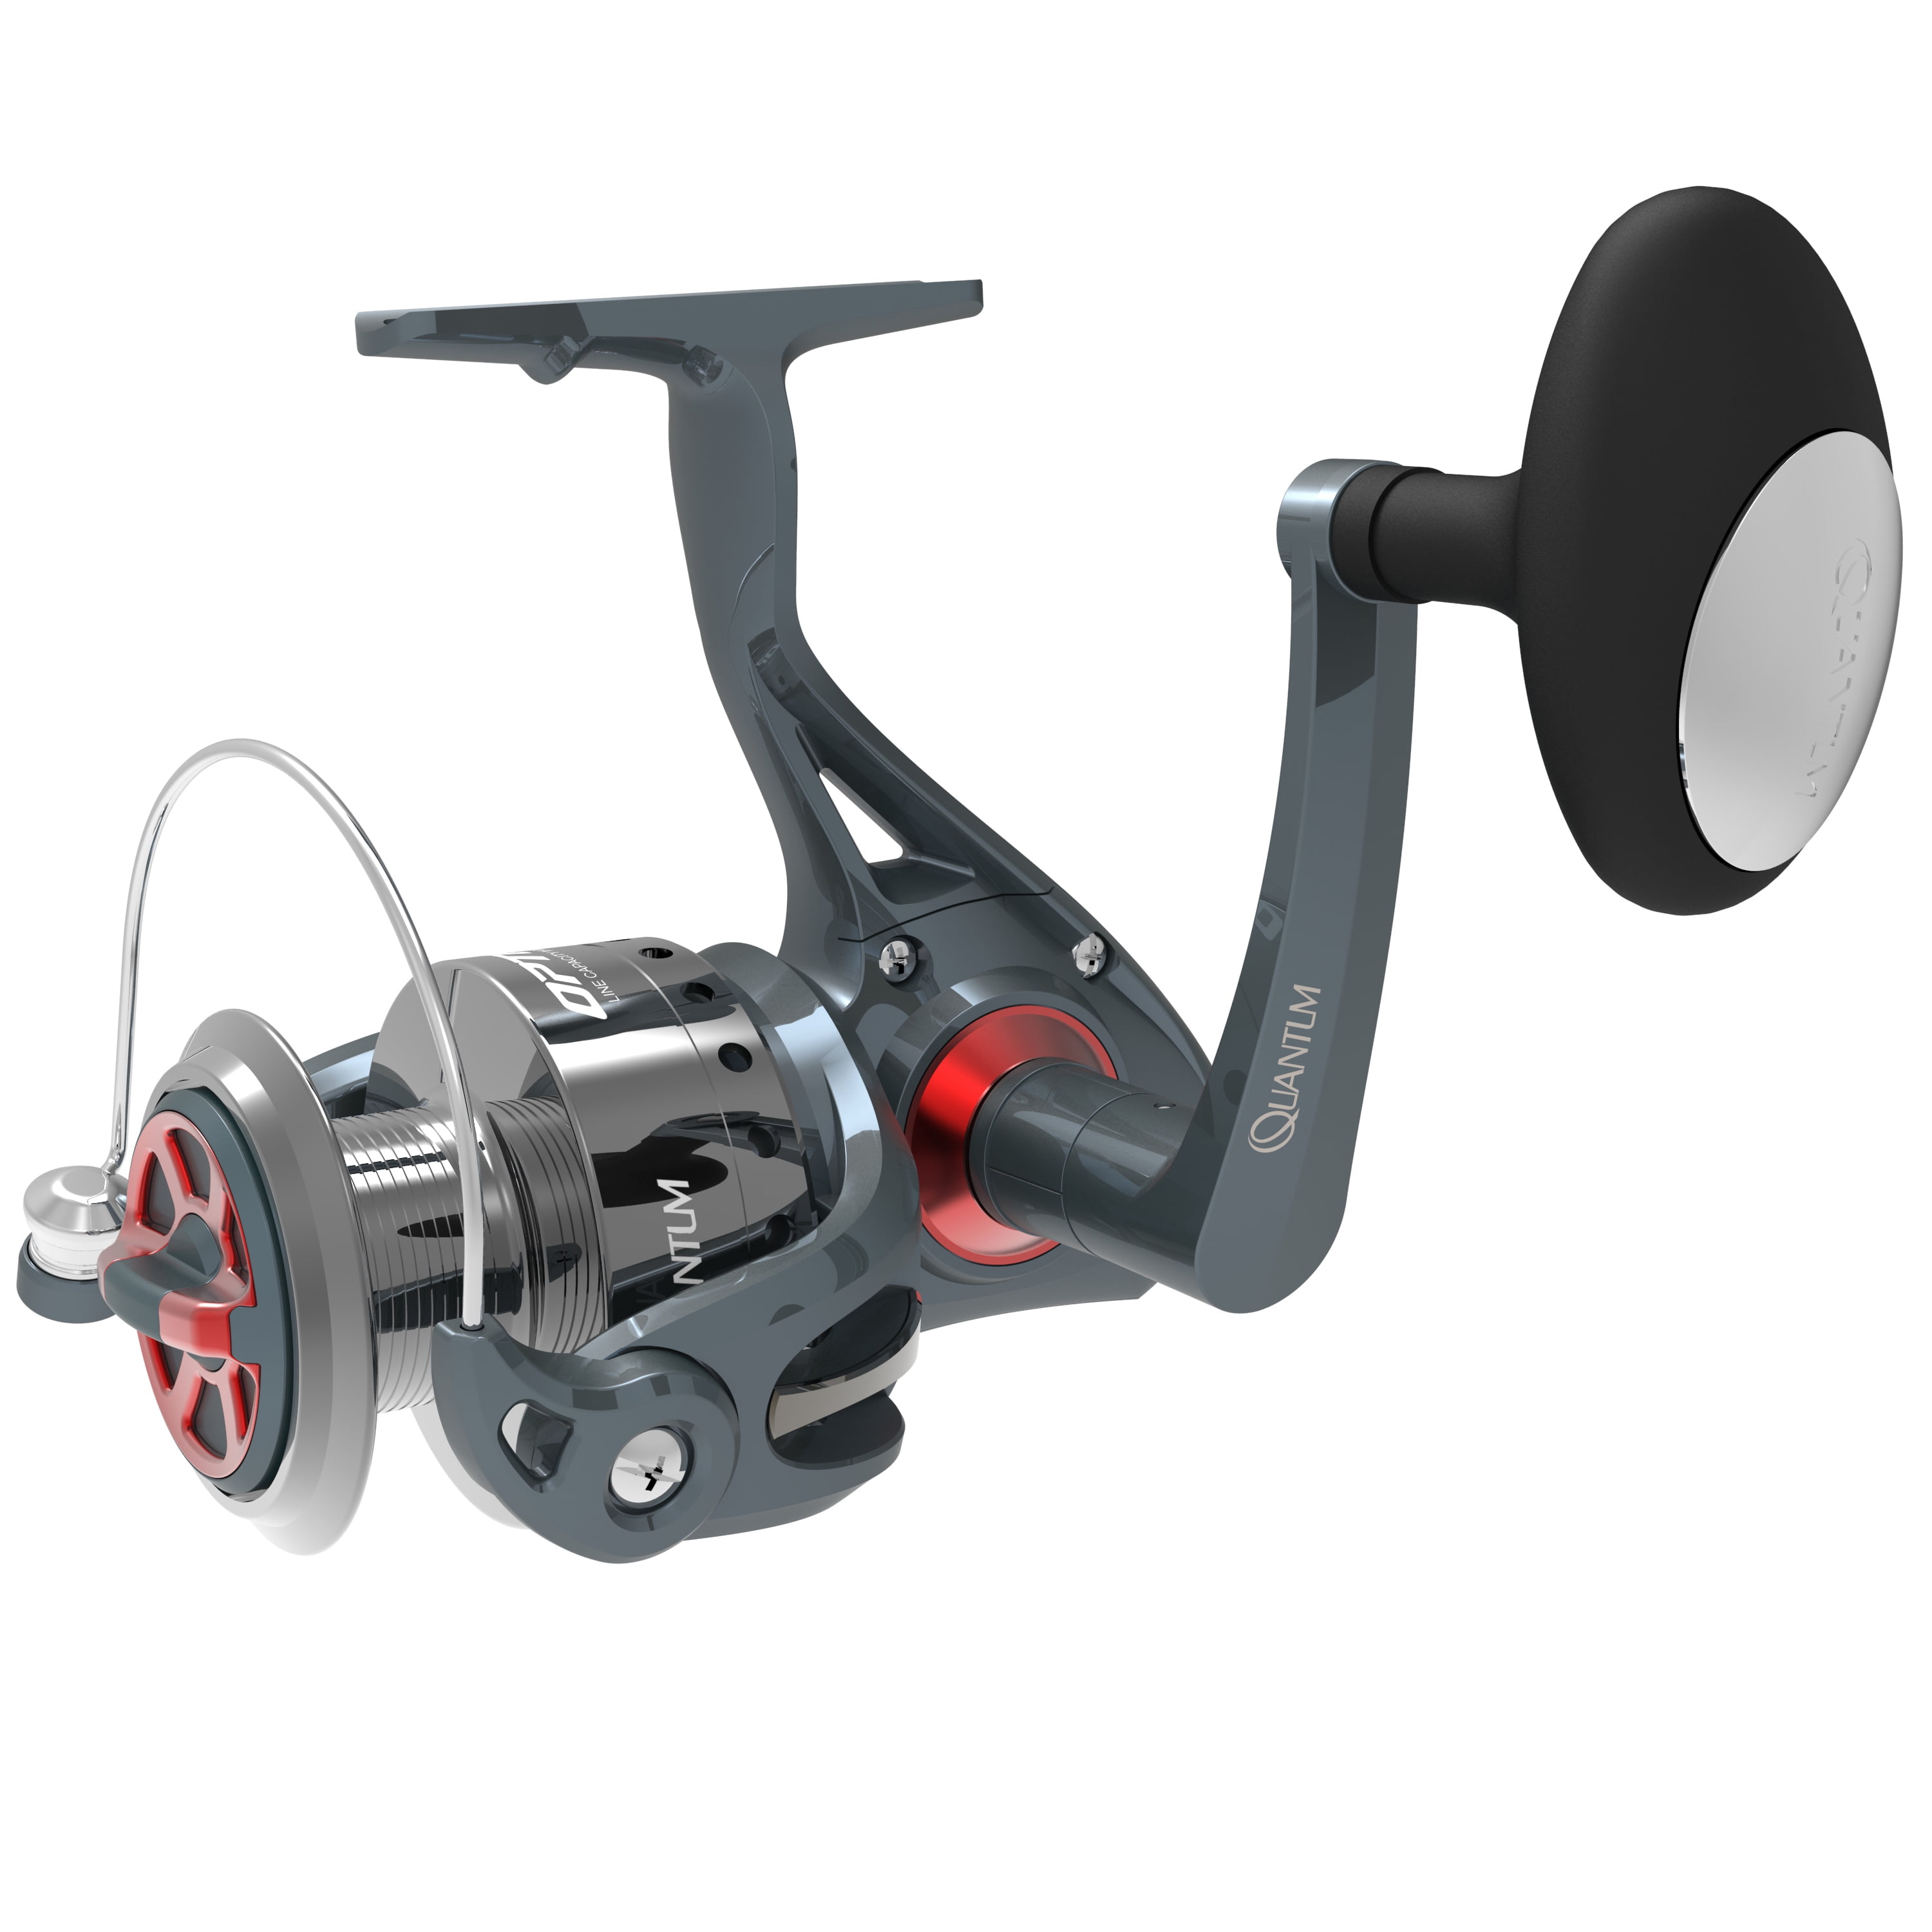 oem fishing reels, oem fishing reels Suppliers and Manufacturers at